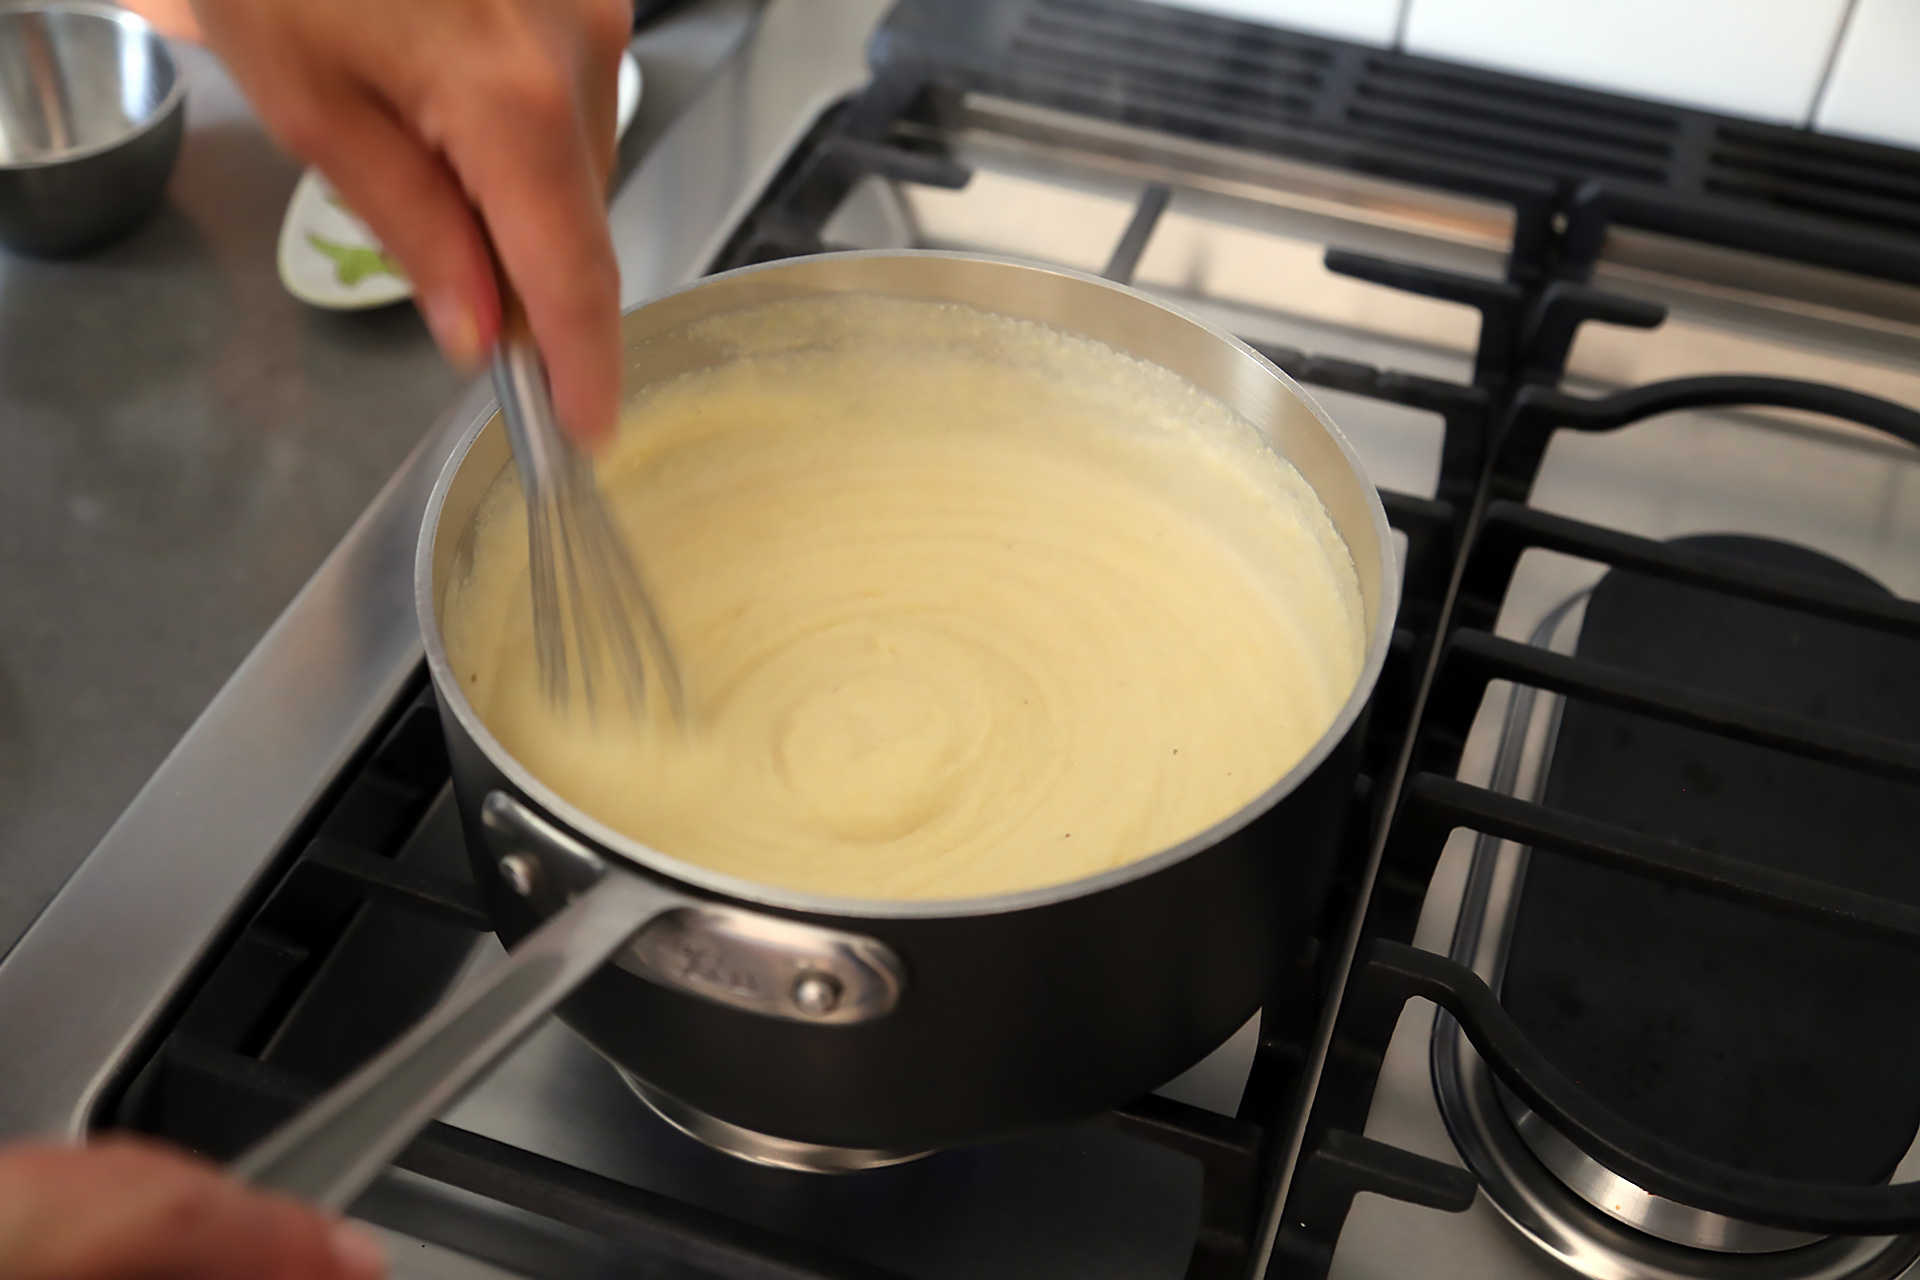 Cook, stirring constantly, until the mixture thickens, 1 or 2 minutes.